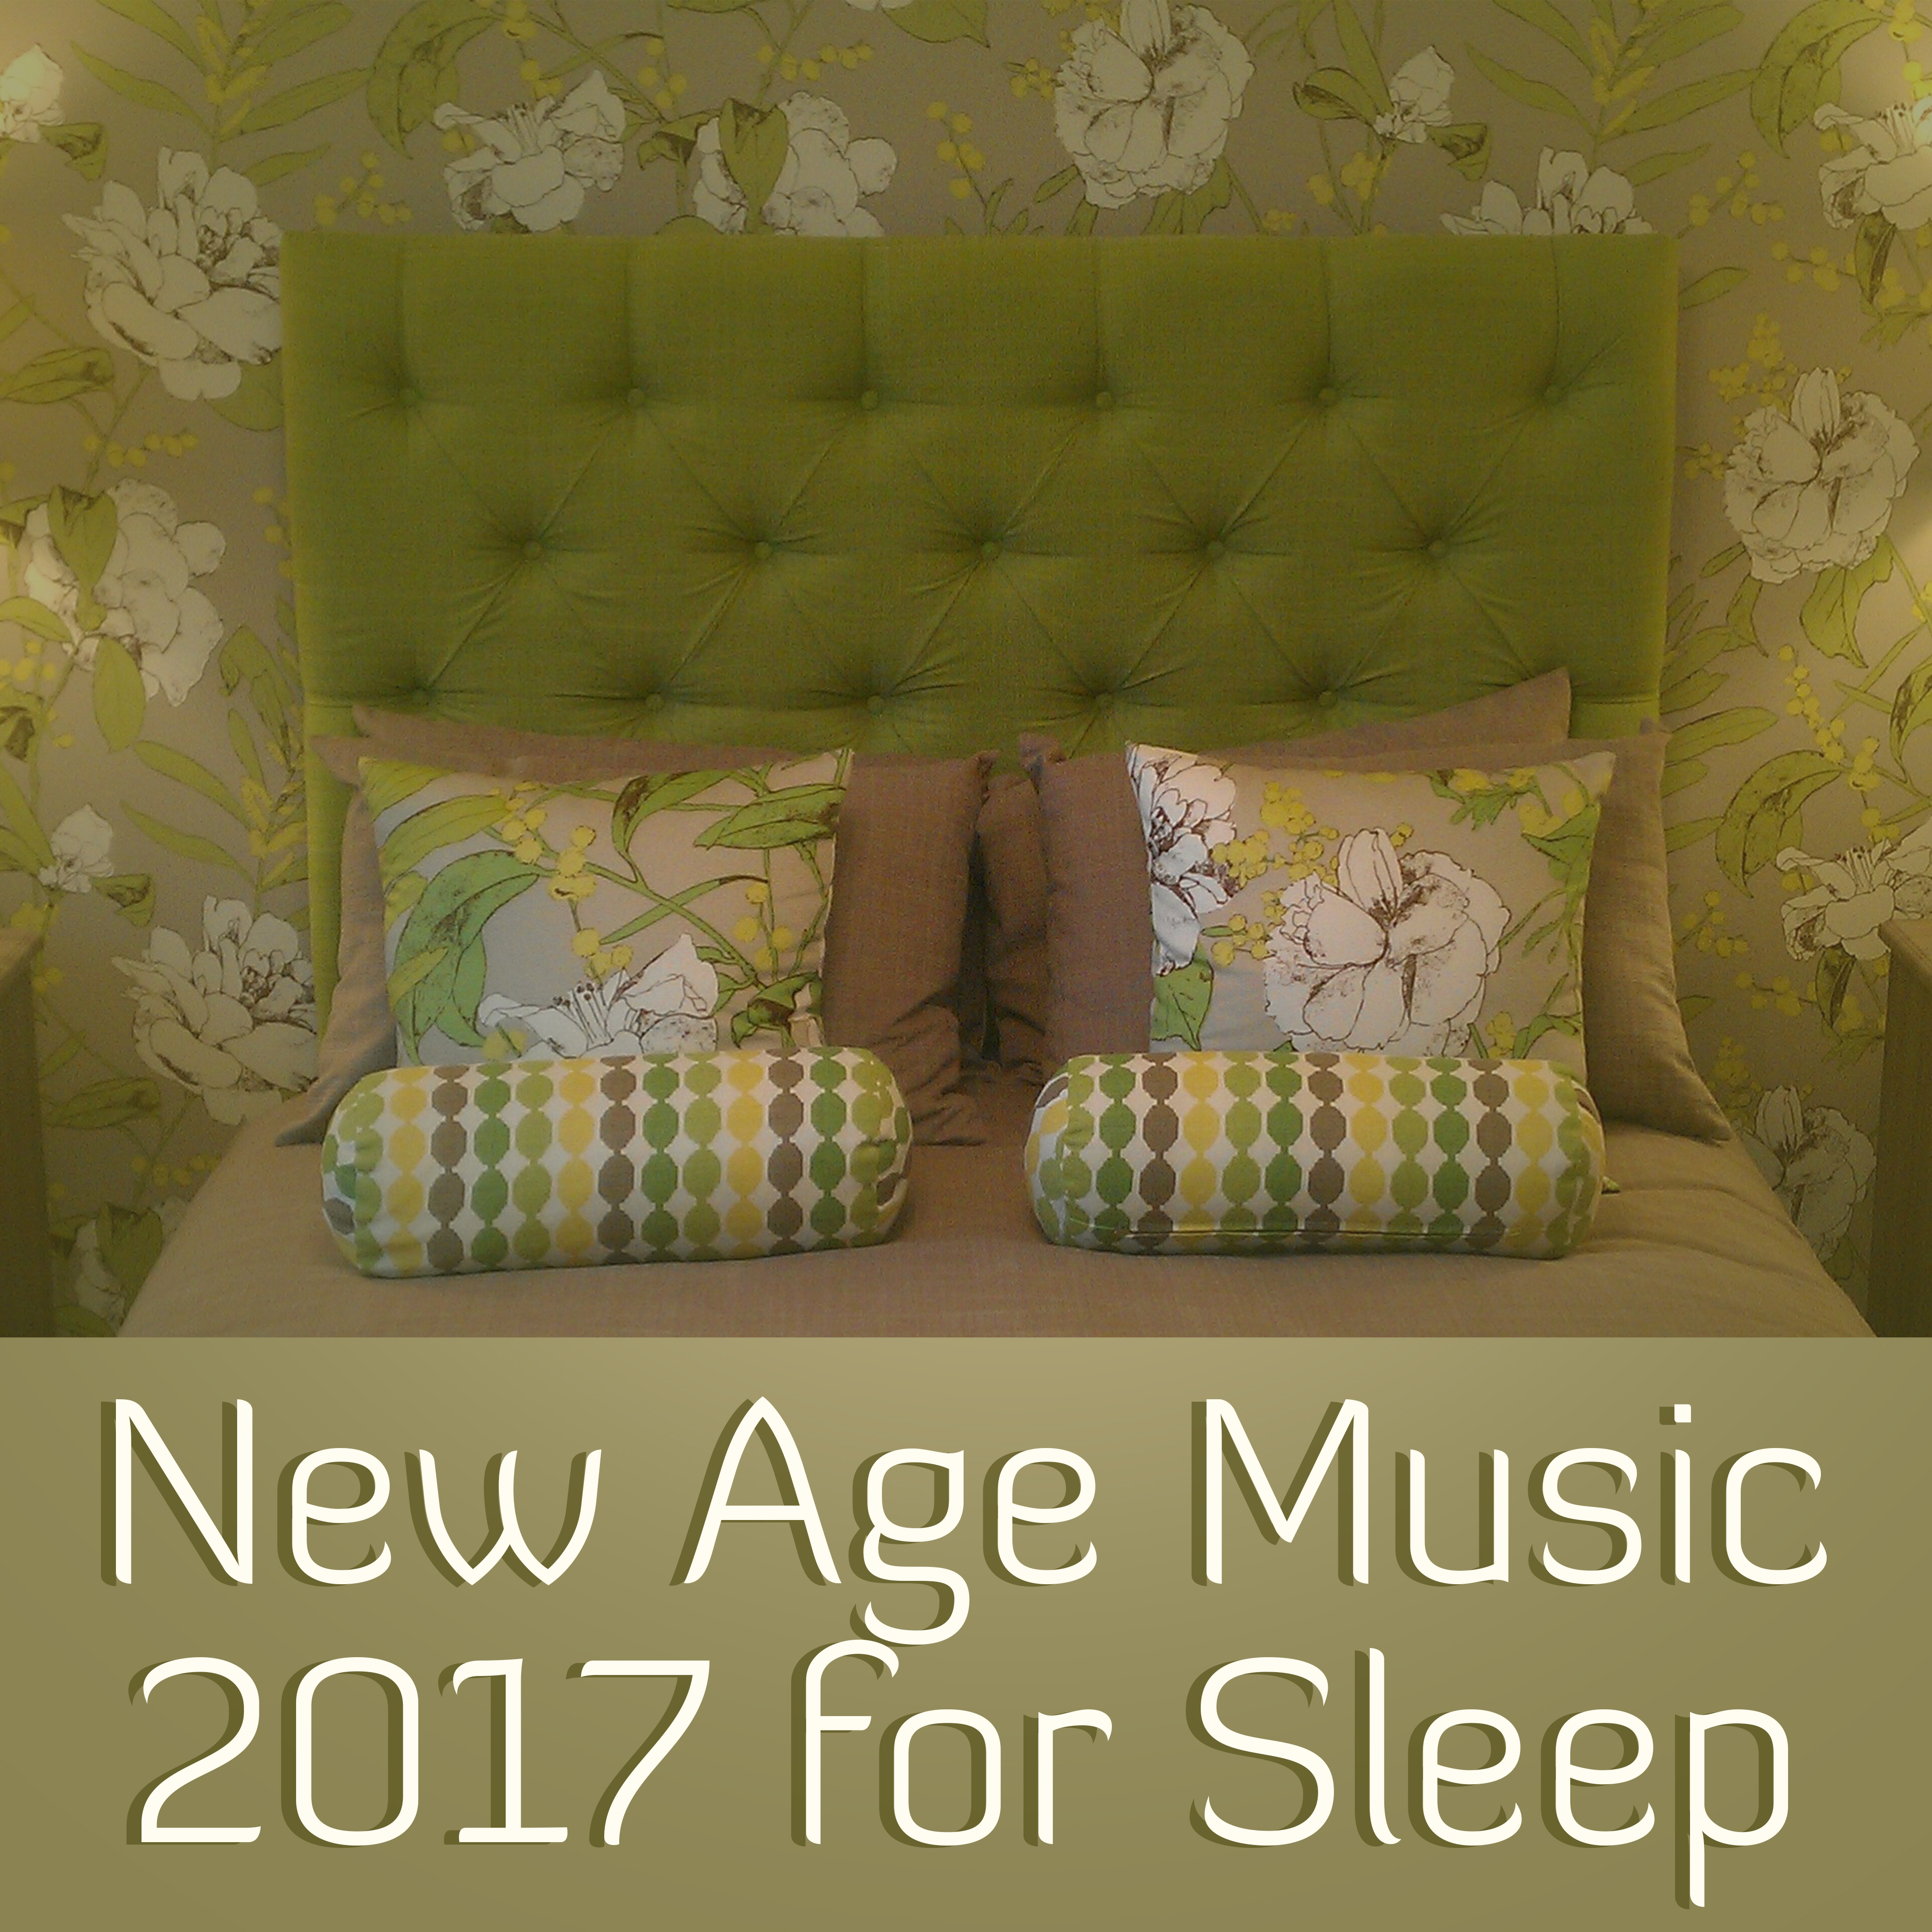 New Age Music 2017 for Sleep – Healing Lullabies to Bed, Soft Songs at Goodnight, Pure Sleep, Bedtime, Peaceful Music for Relaxation